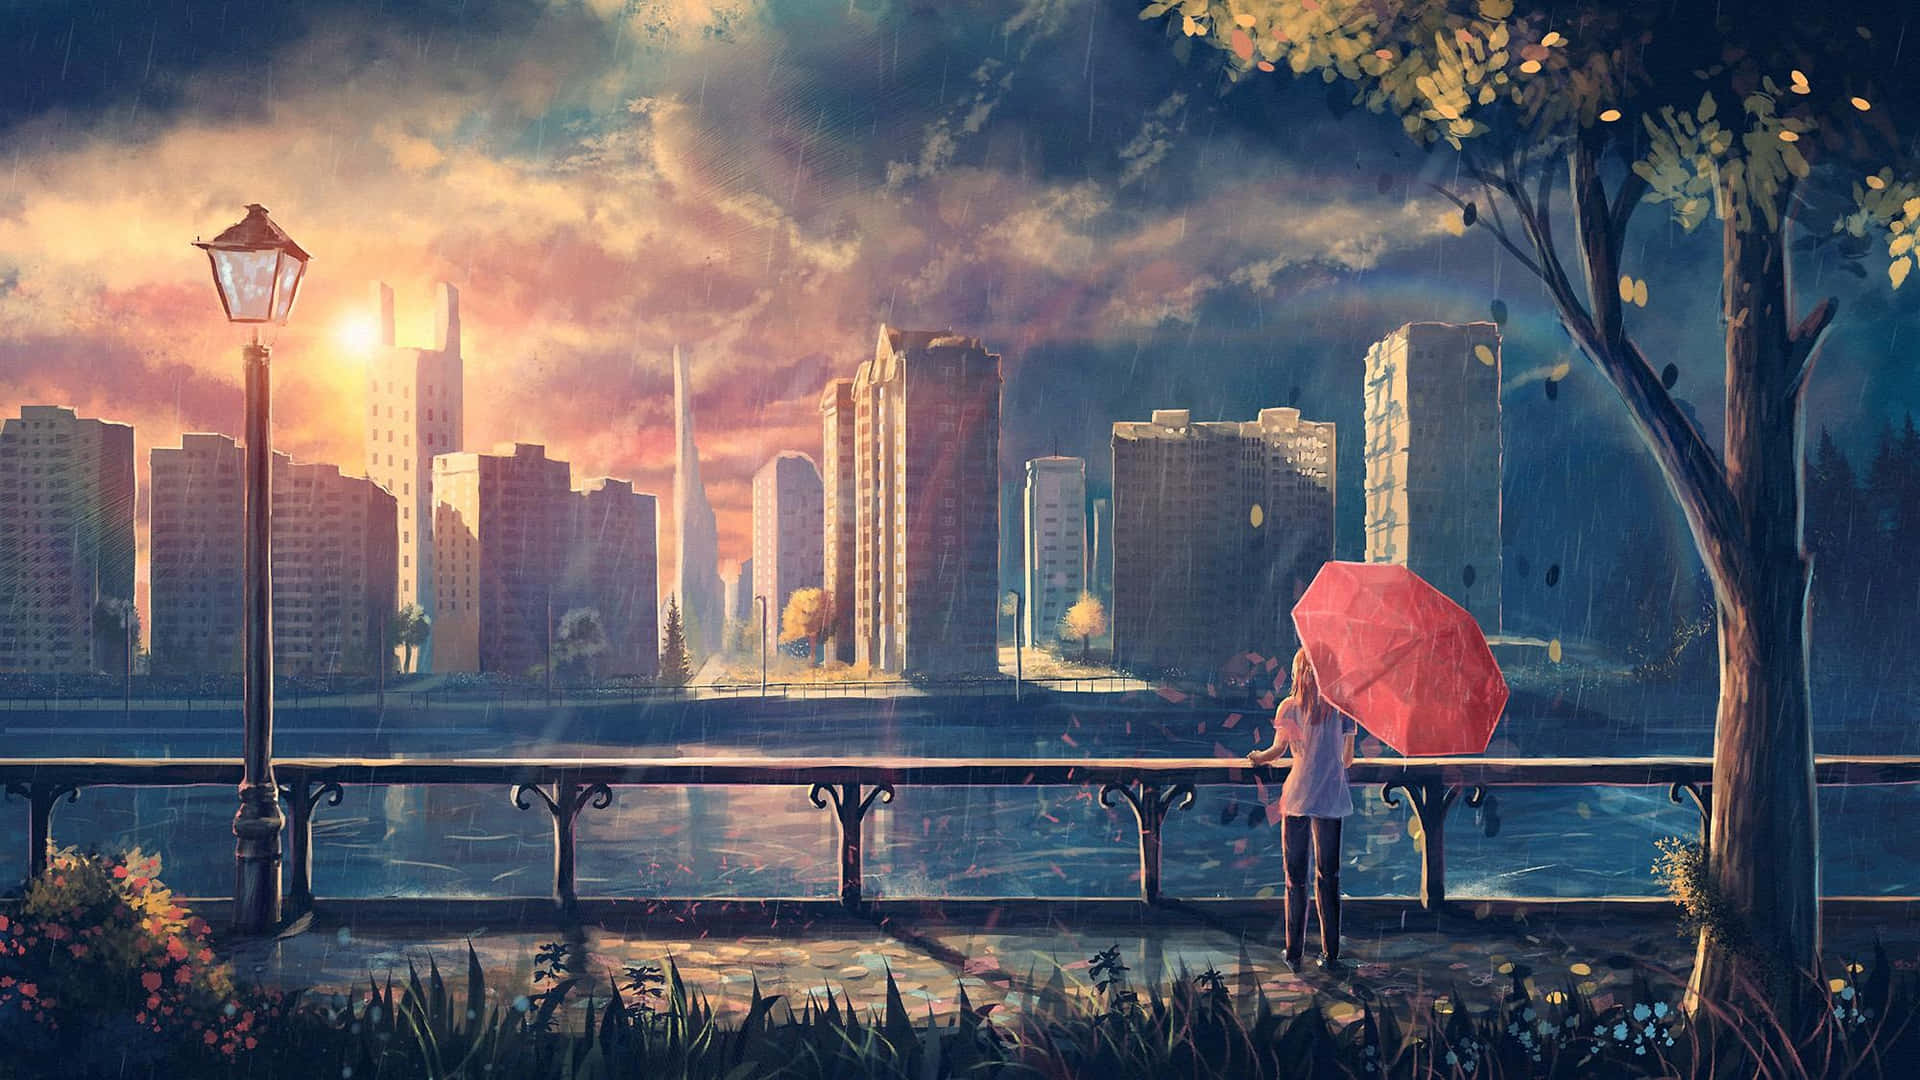 After the rain, we run on [by 雪町] : ImaginarySliceOfLife  Anime  backgrounds wallpapers, Anime scenery wallpaper, Anime scenery